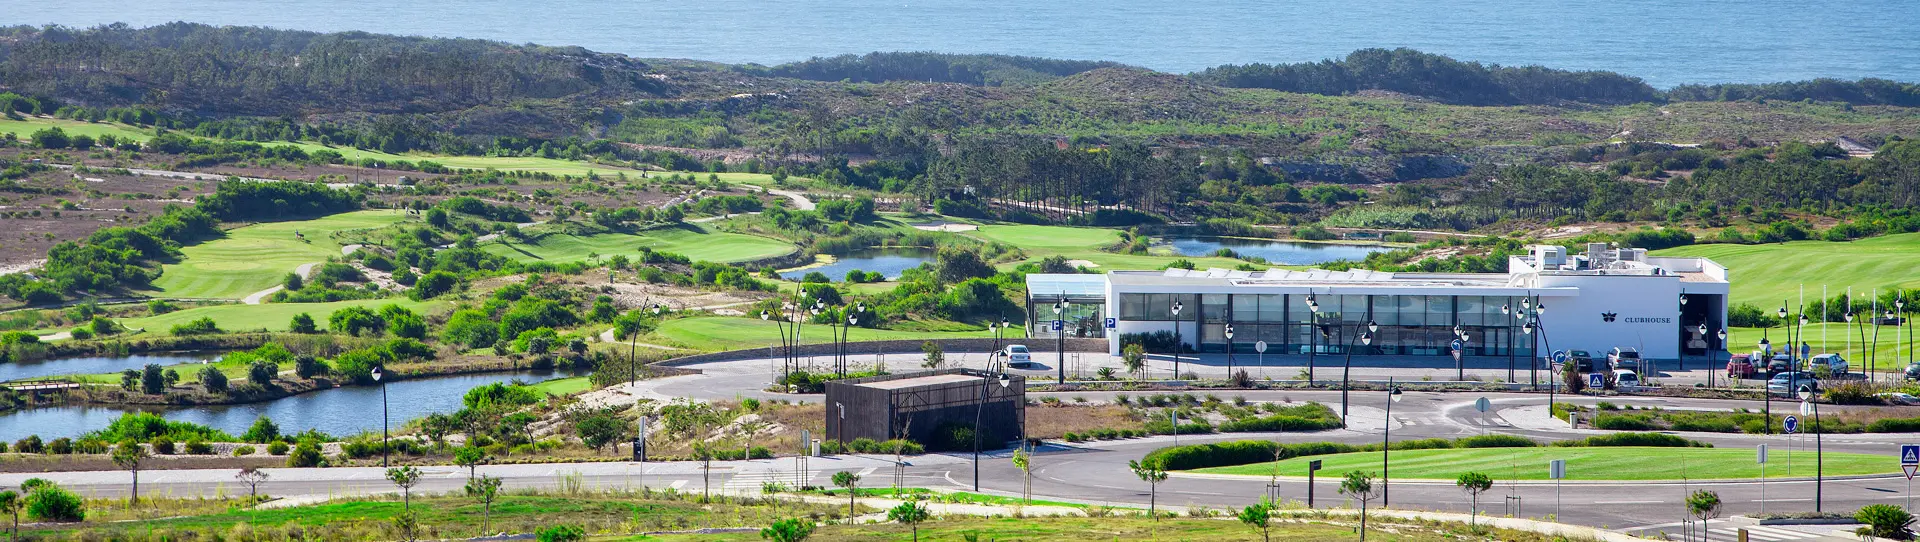 Portugal golf holidays - 5 Nights BB & 3 Golf Rounds - Photo 3